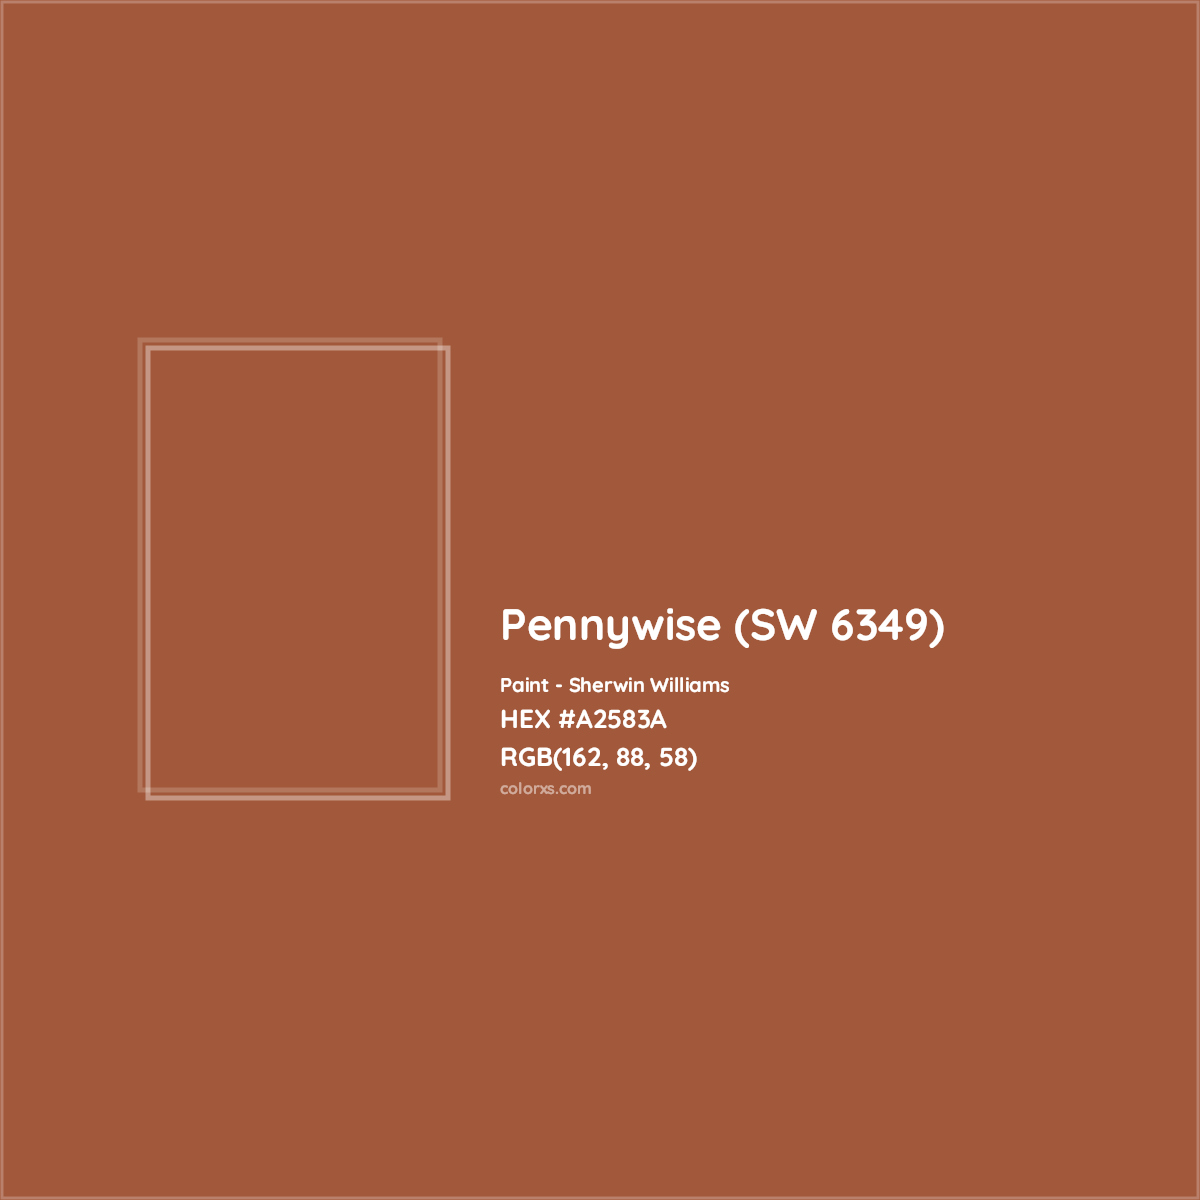 HEX #A2583A Pennywise (SW 6349) Paint Sherwin Williams - Color Code